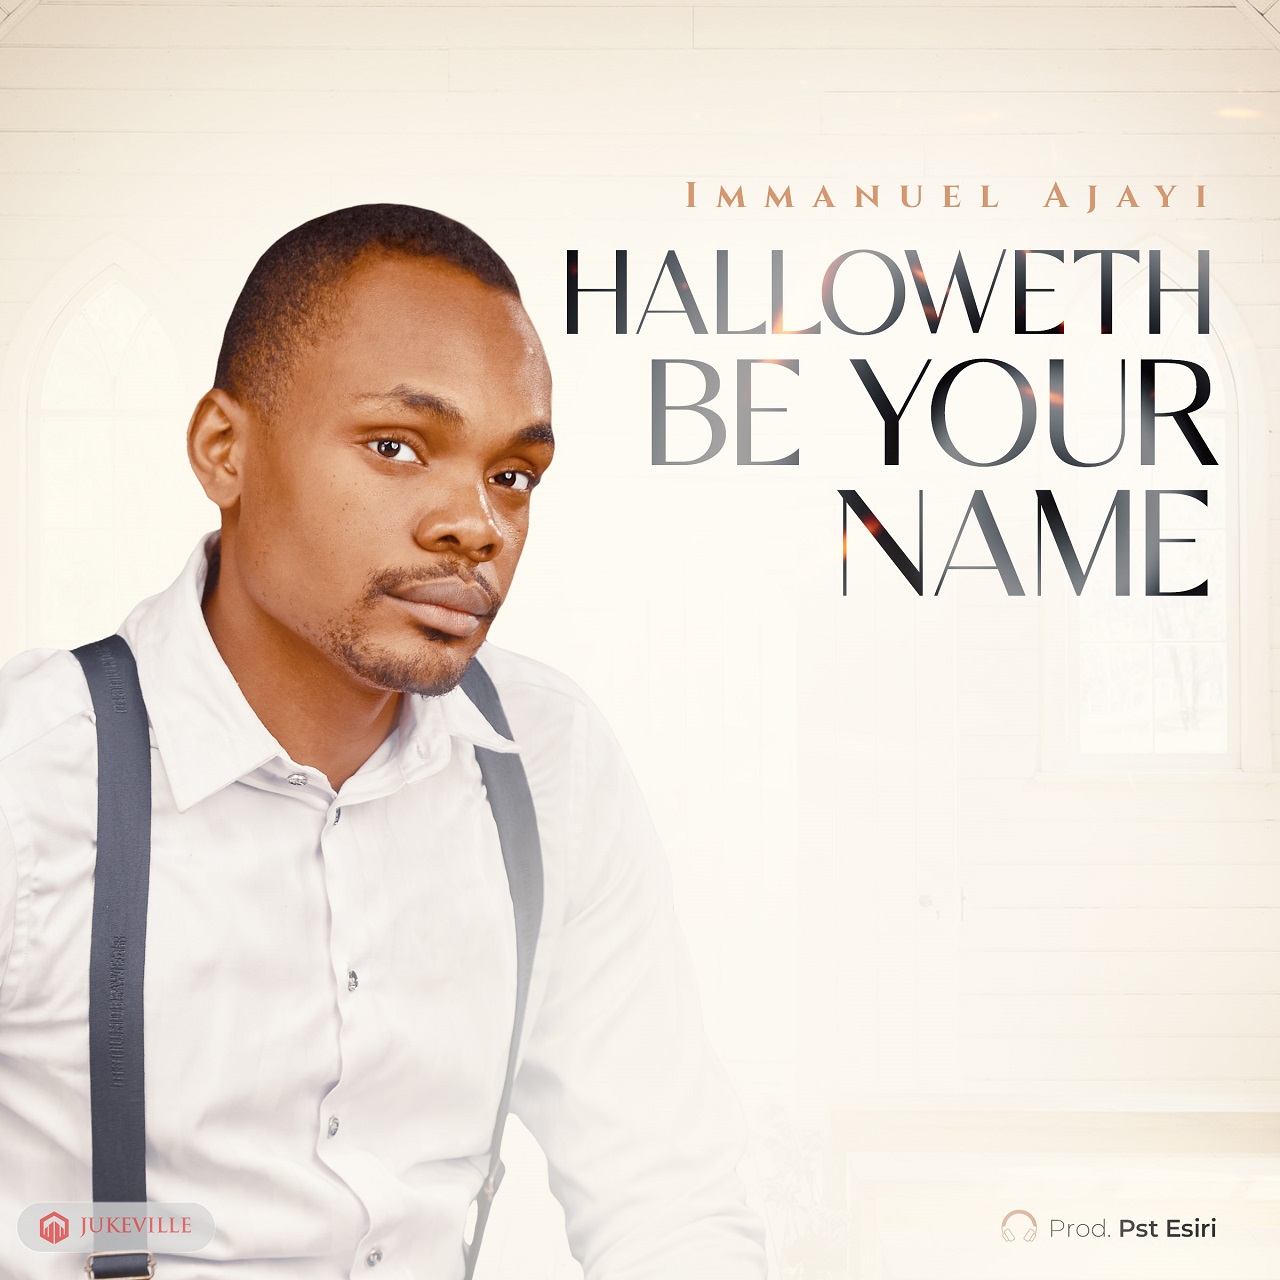 Halloweth-be-Your-Name-Immanuel-Ajayi-mp3-